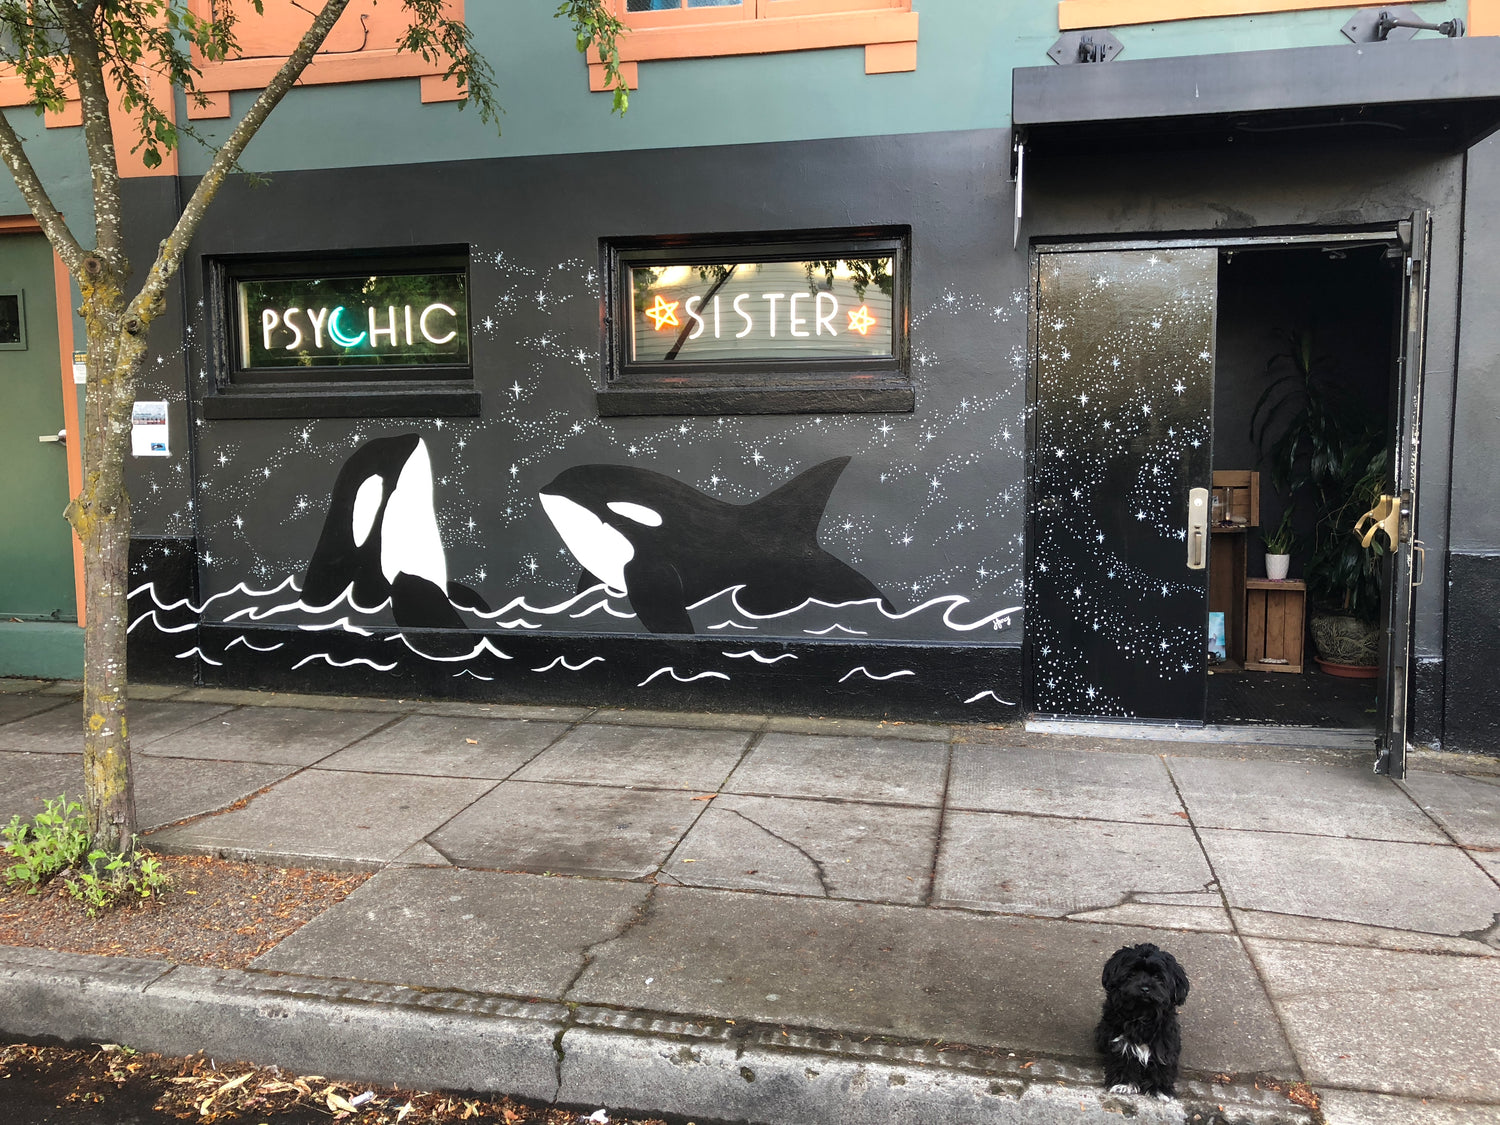 Image of exterior Psychic Sister Portland location with orca mural.